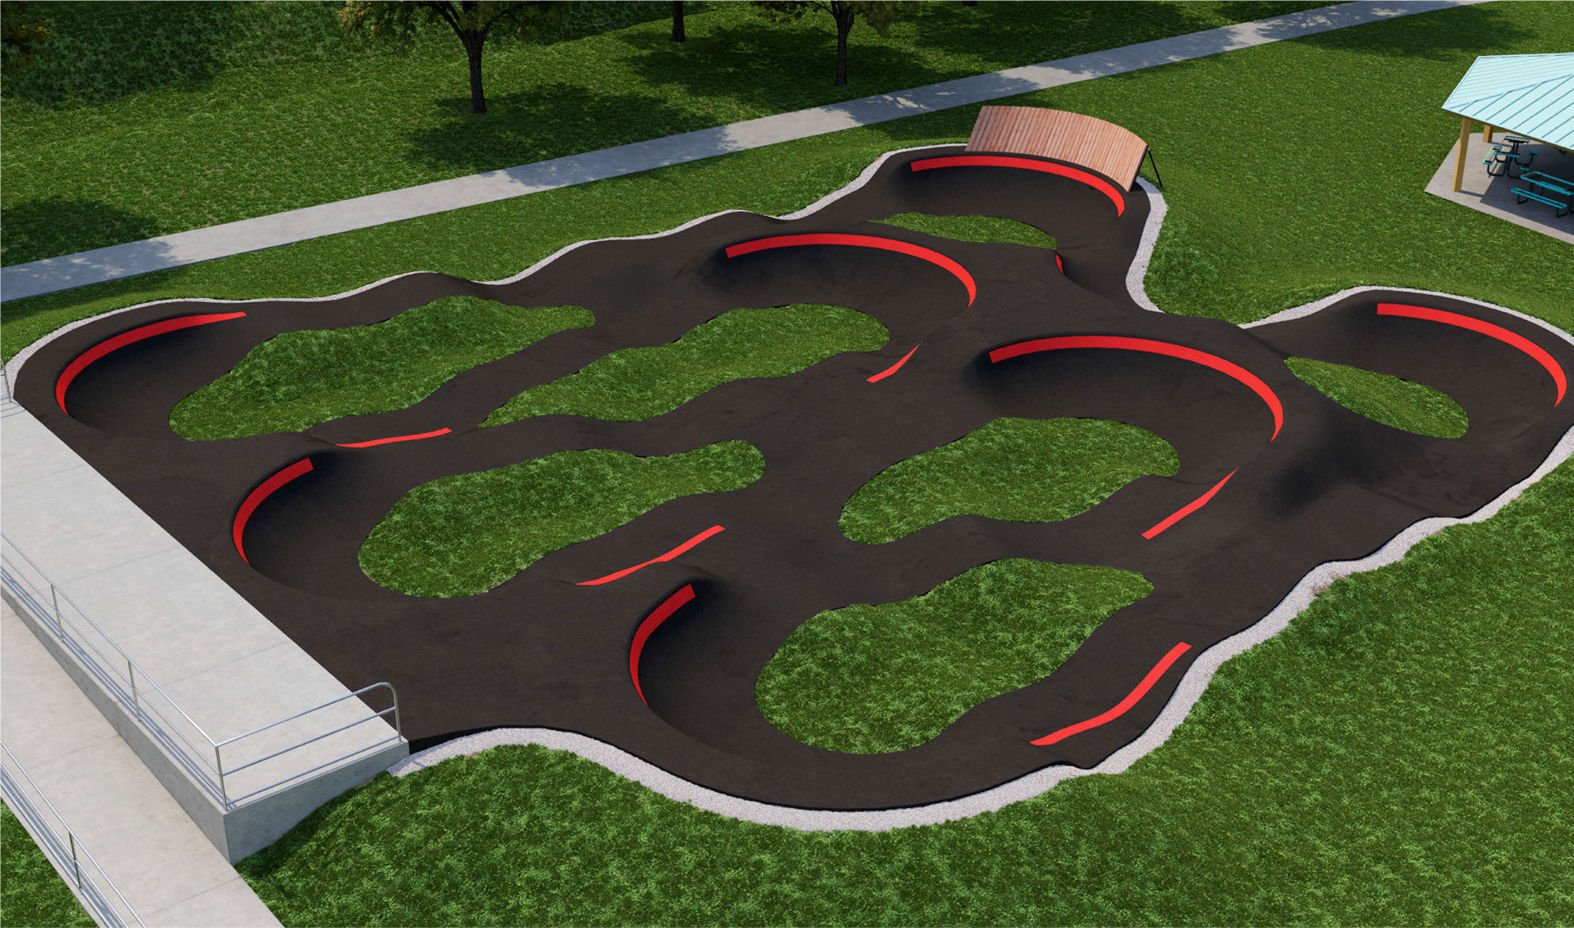 Workshop will offer chance for public input on proposed pump track